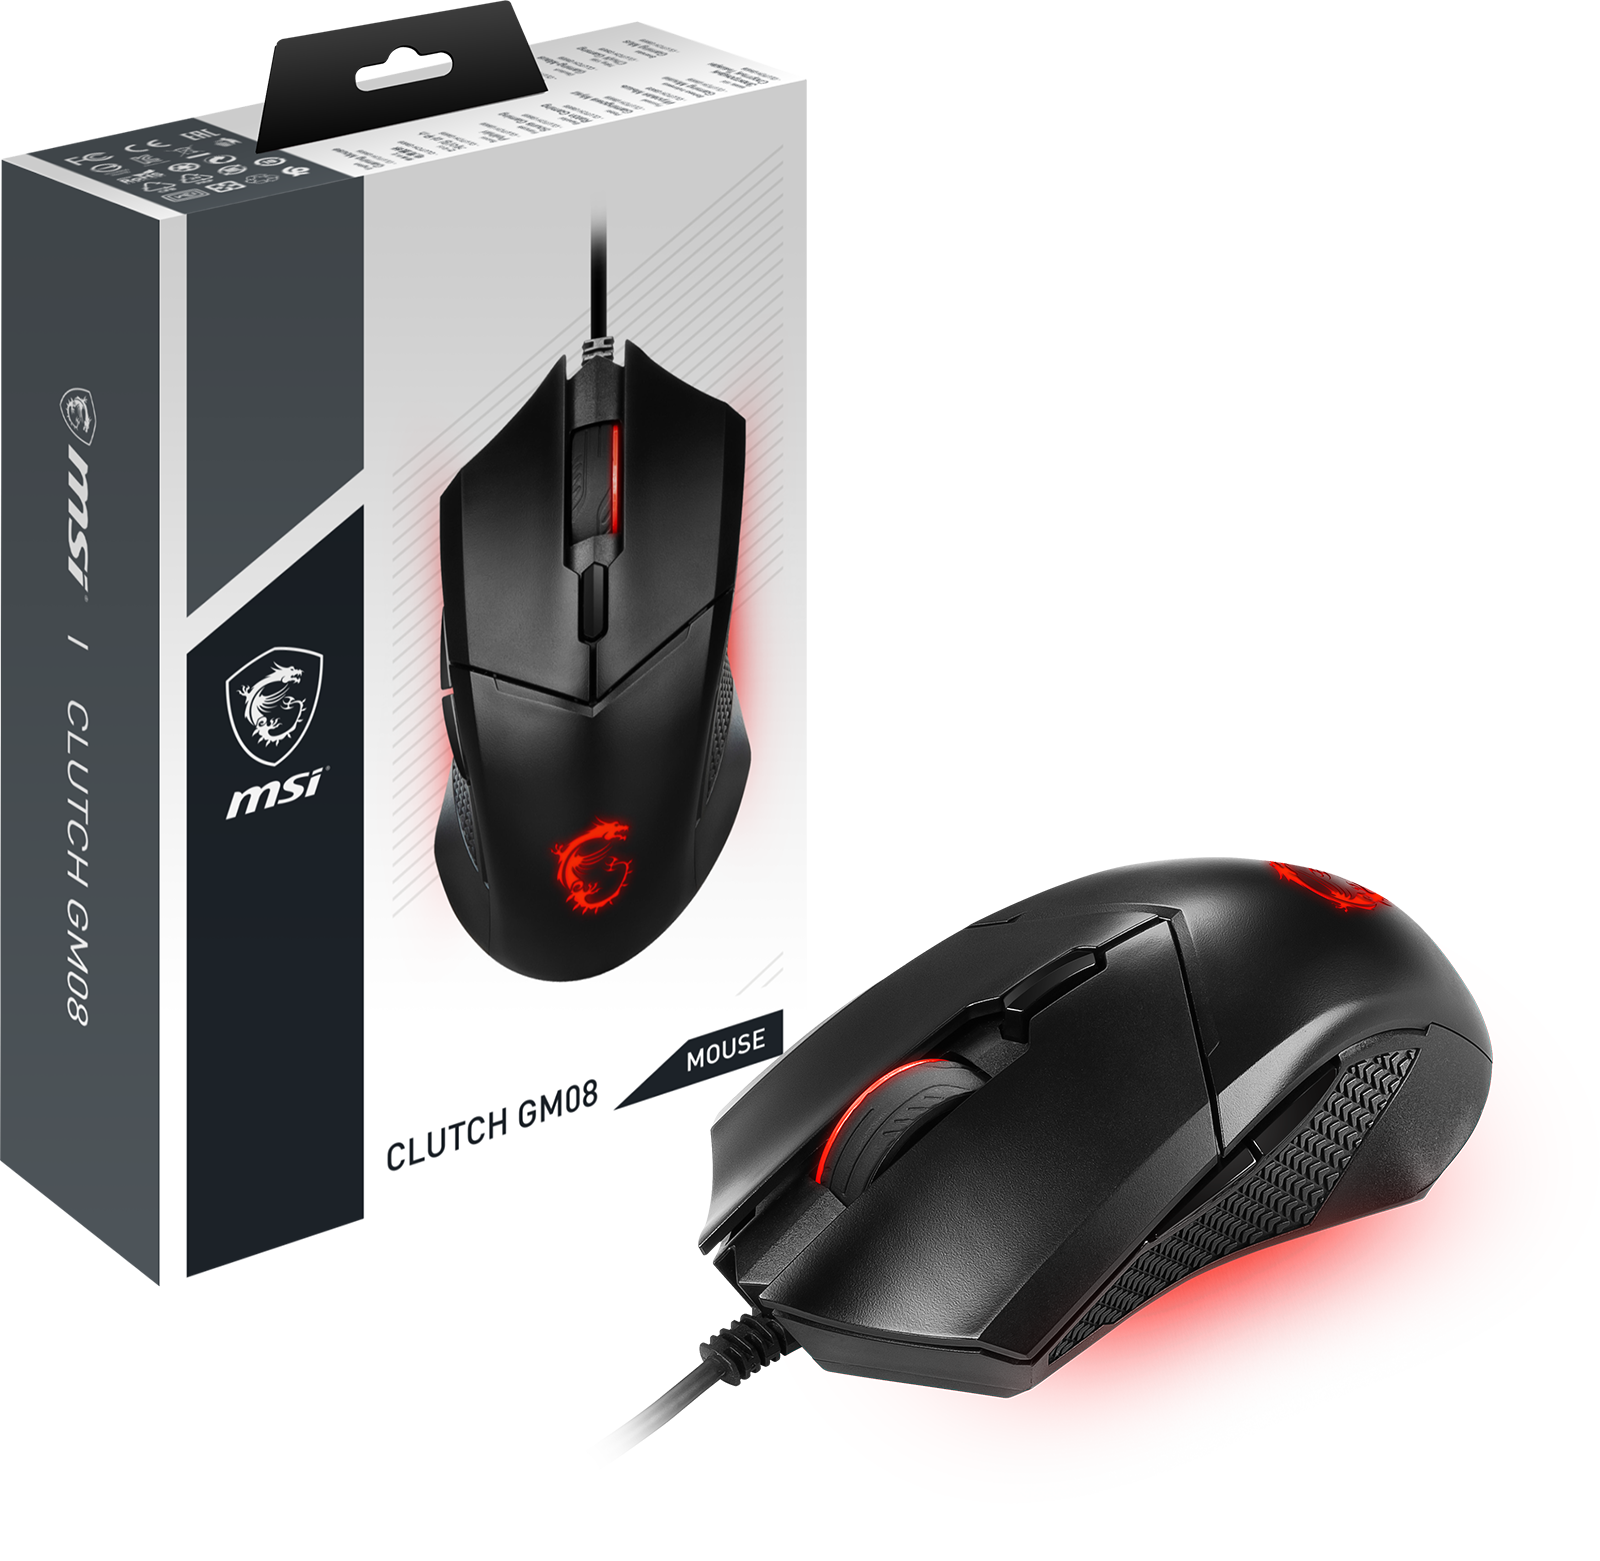 MSI CLUTCH GM08 GAMING MOUSE